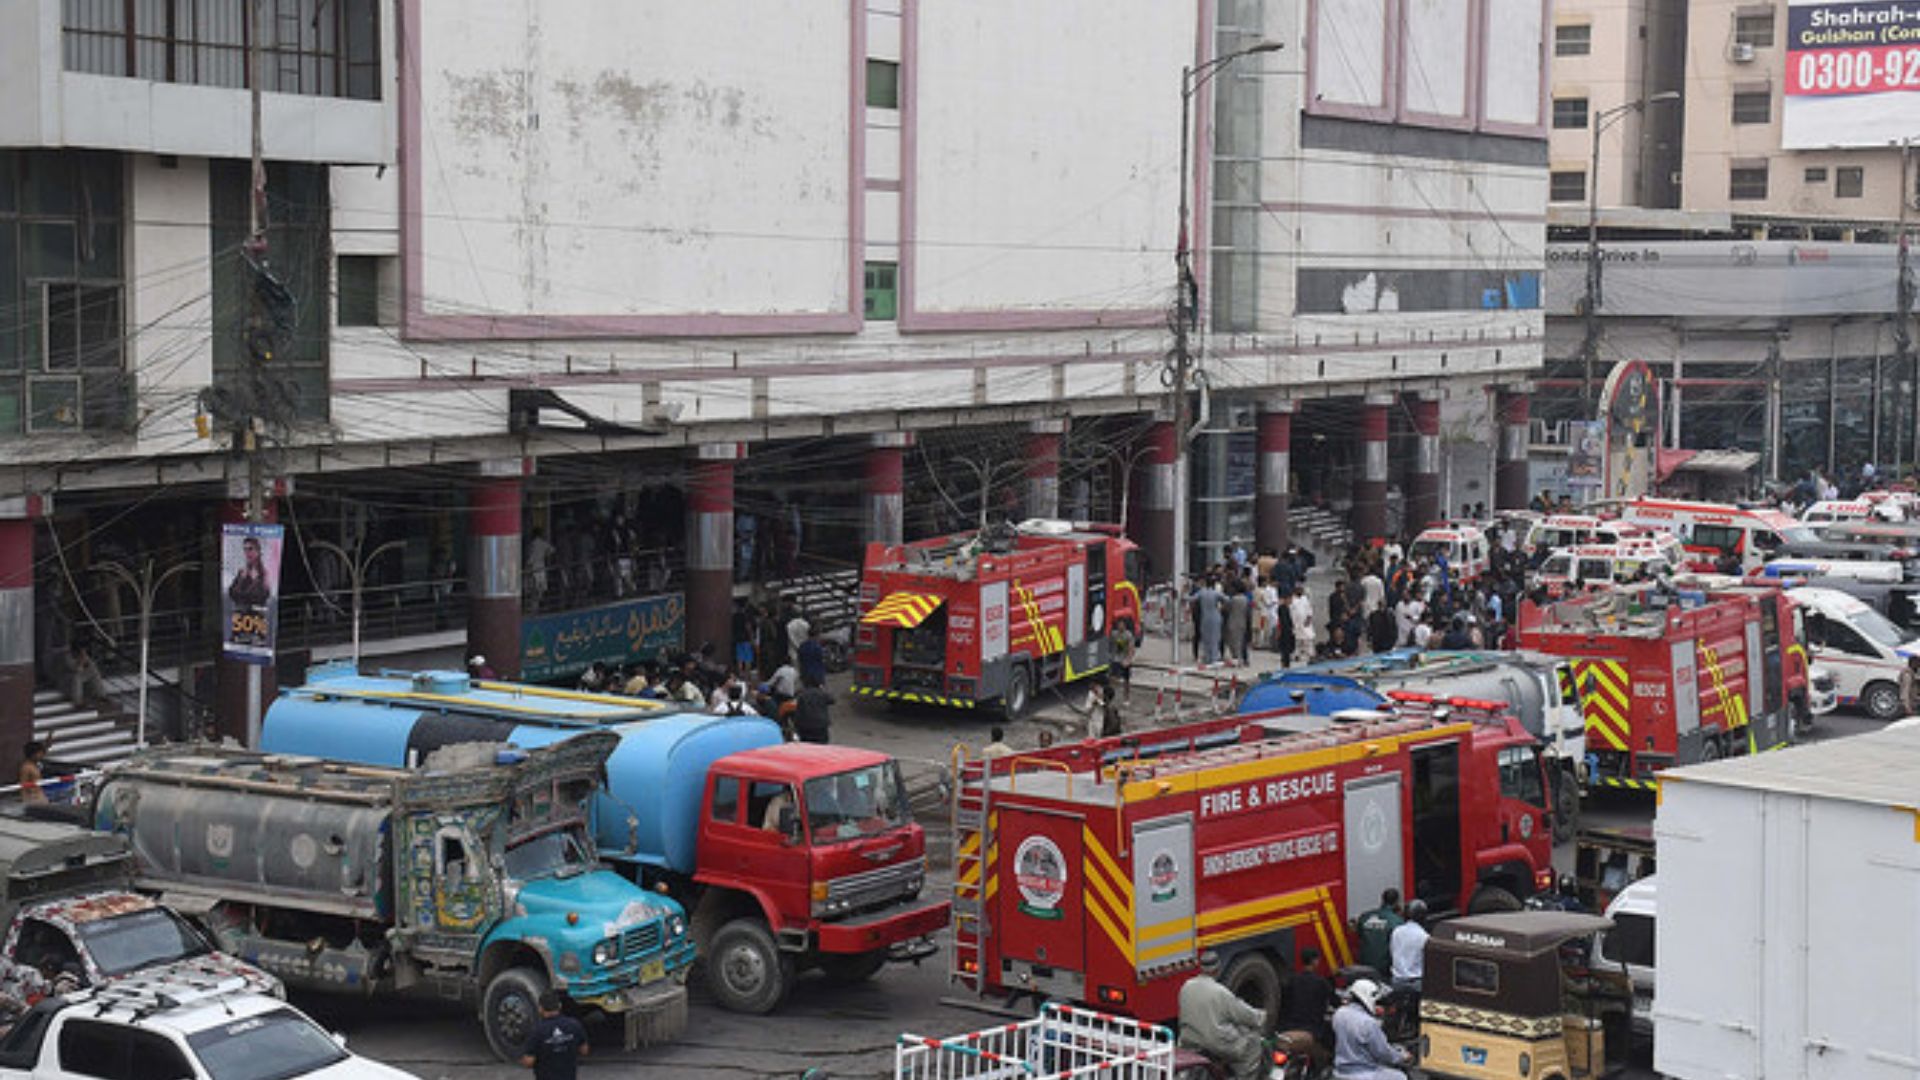 Pakistan: Four people have died and two injured in the Karachi mall fire